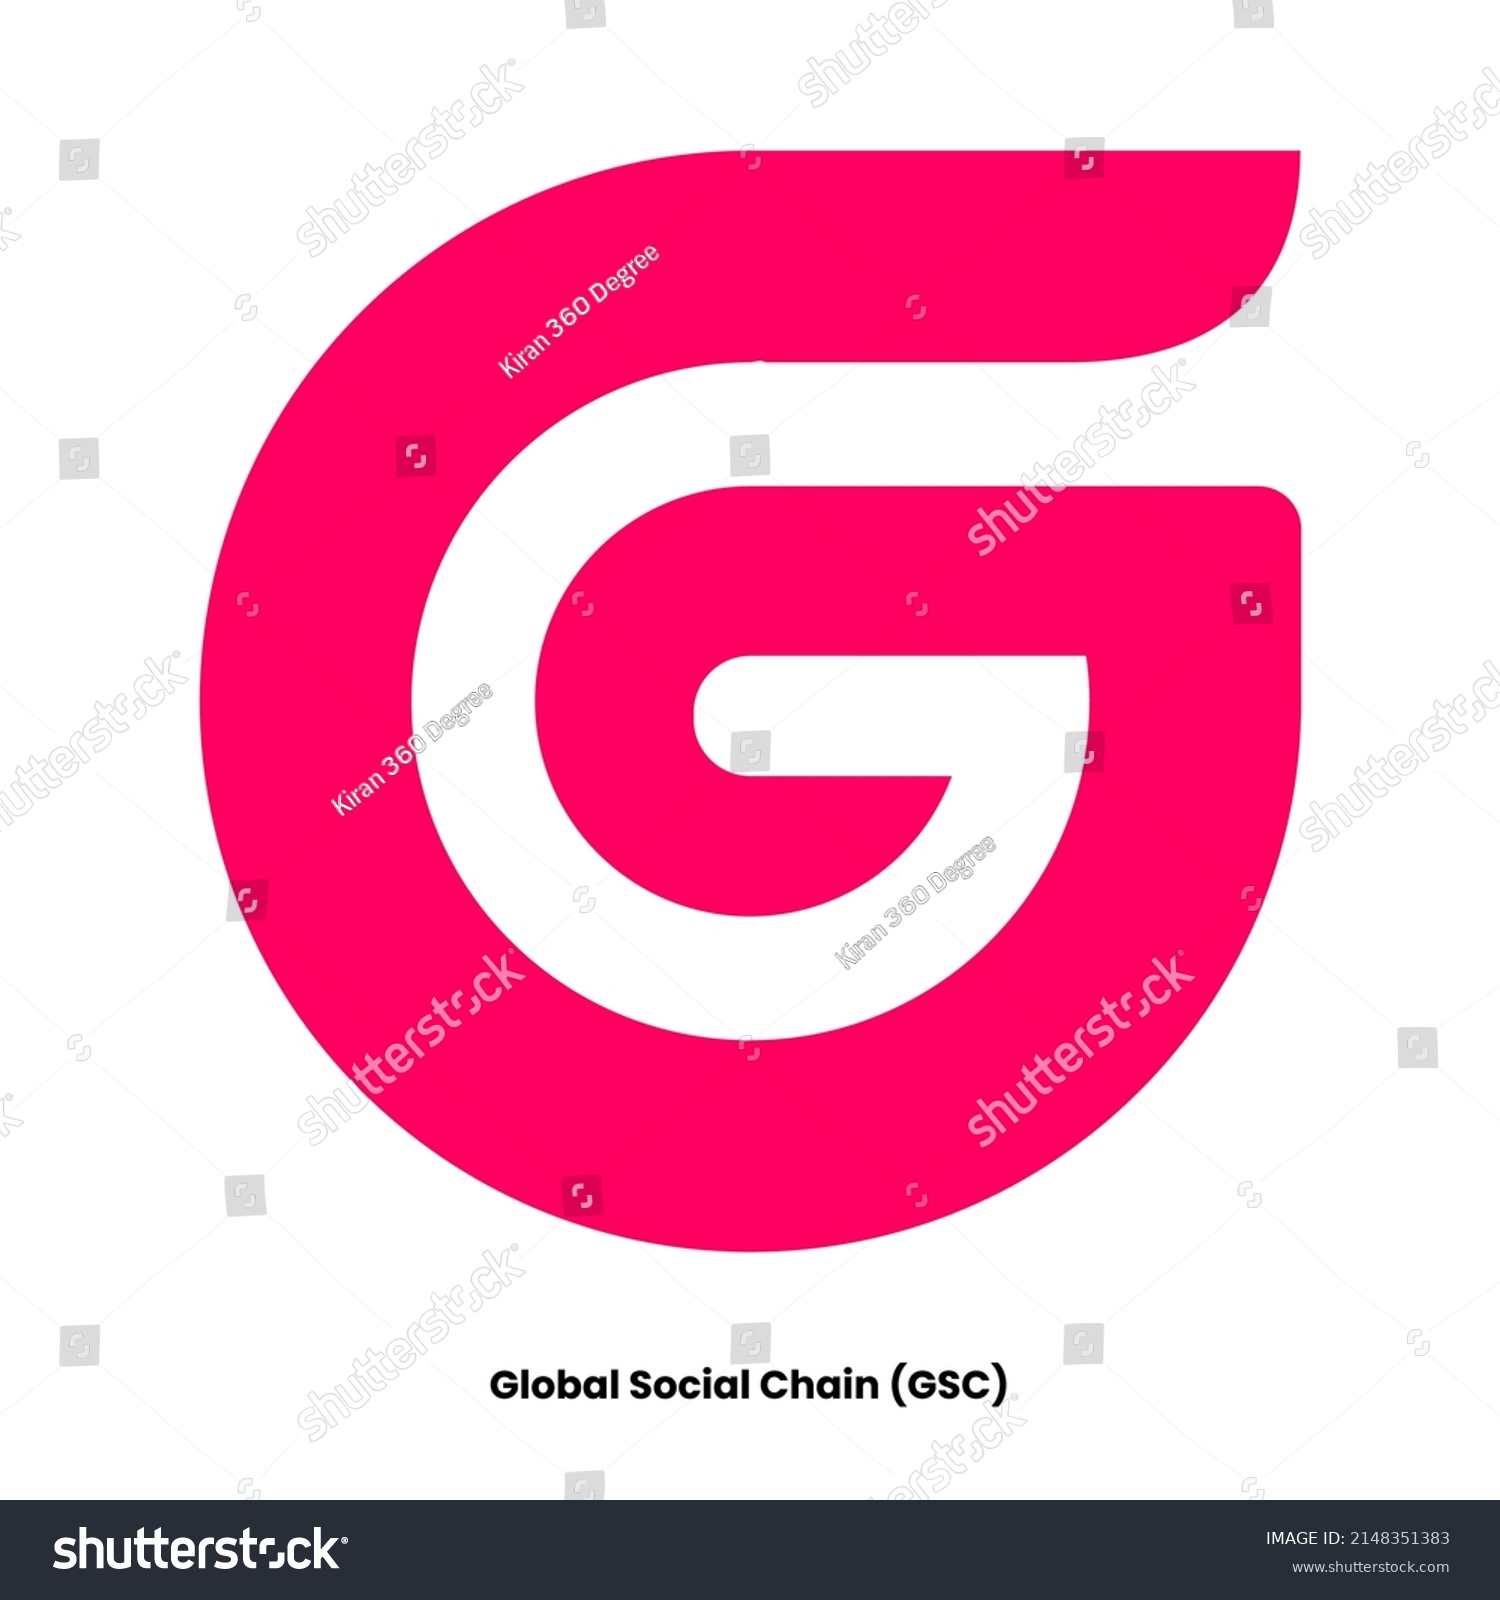 SVG of Global Social Chain crypto currency with symbol GSC. Crypto logo vector illustration for stickers, icon, badges, labels and emblem designs. svg